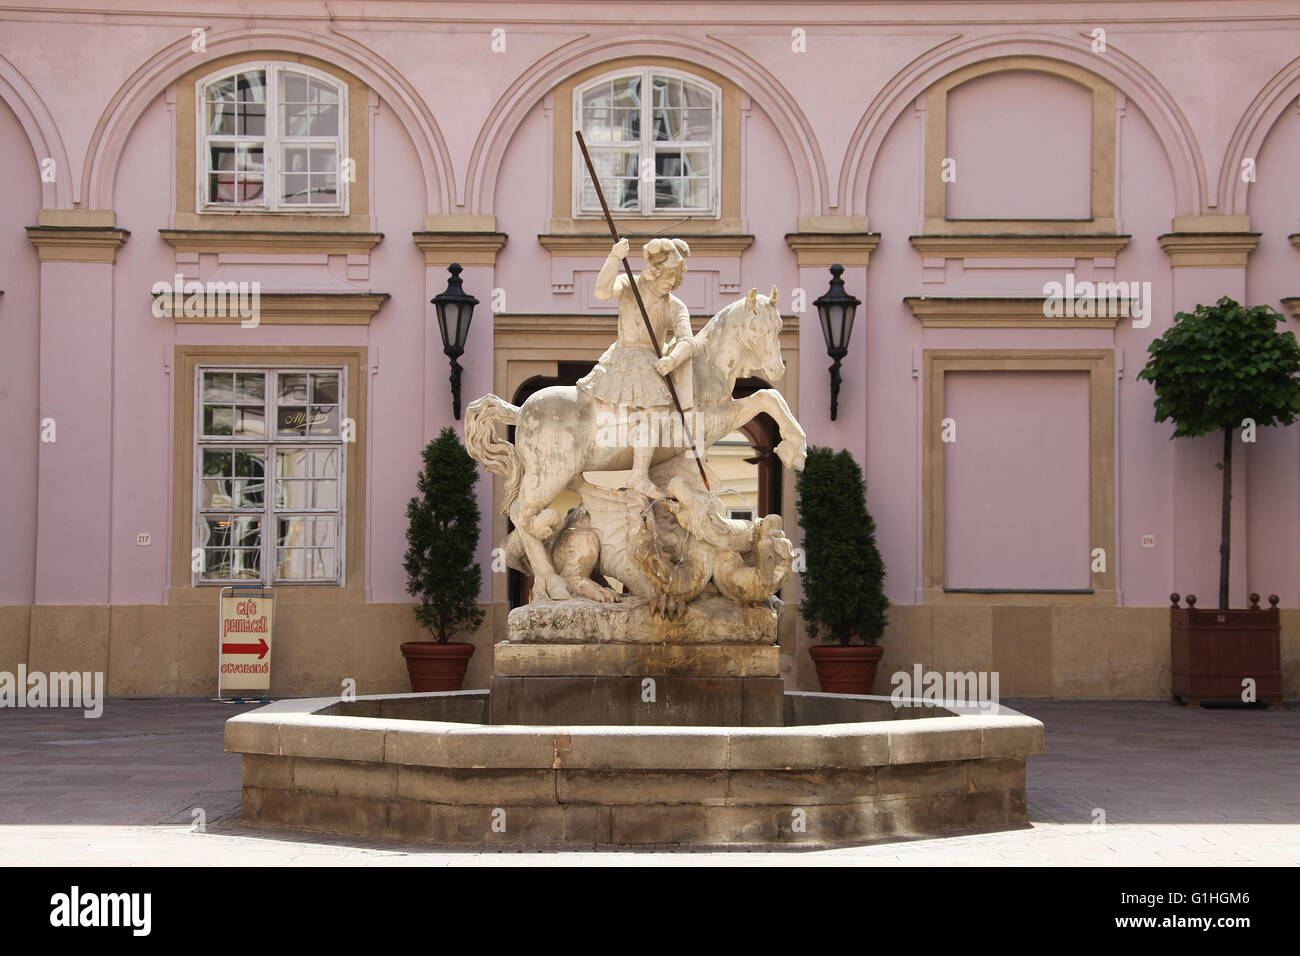 Sculpture of Saint George slaying the dragon at the Primates Palace in Bratislava Stock Photo